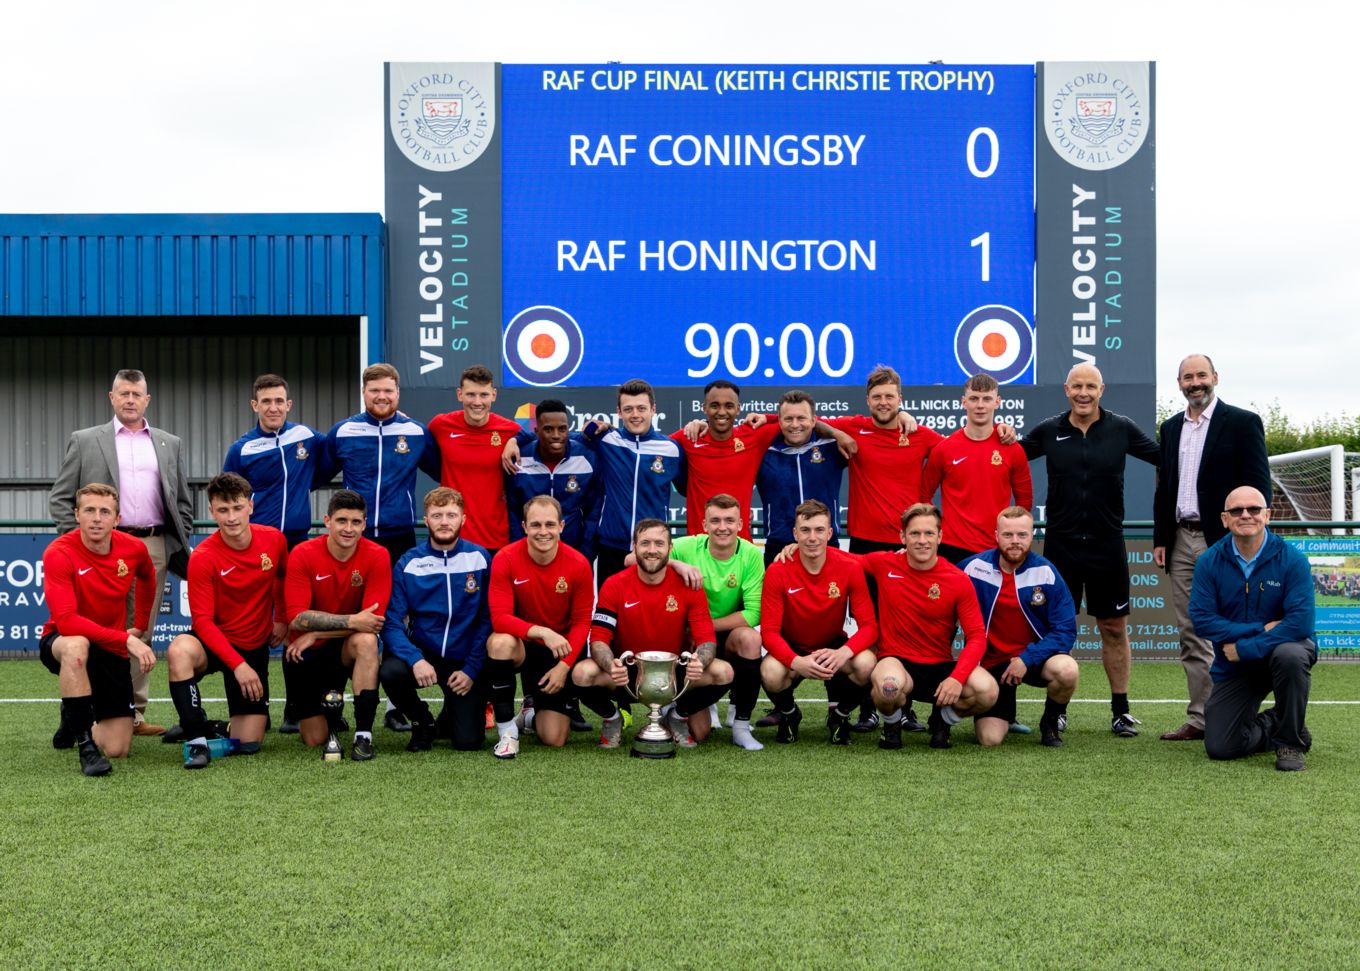 The Winning Team with the Keith Christie Trophy in front of the scoreboard